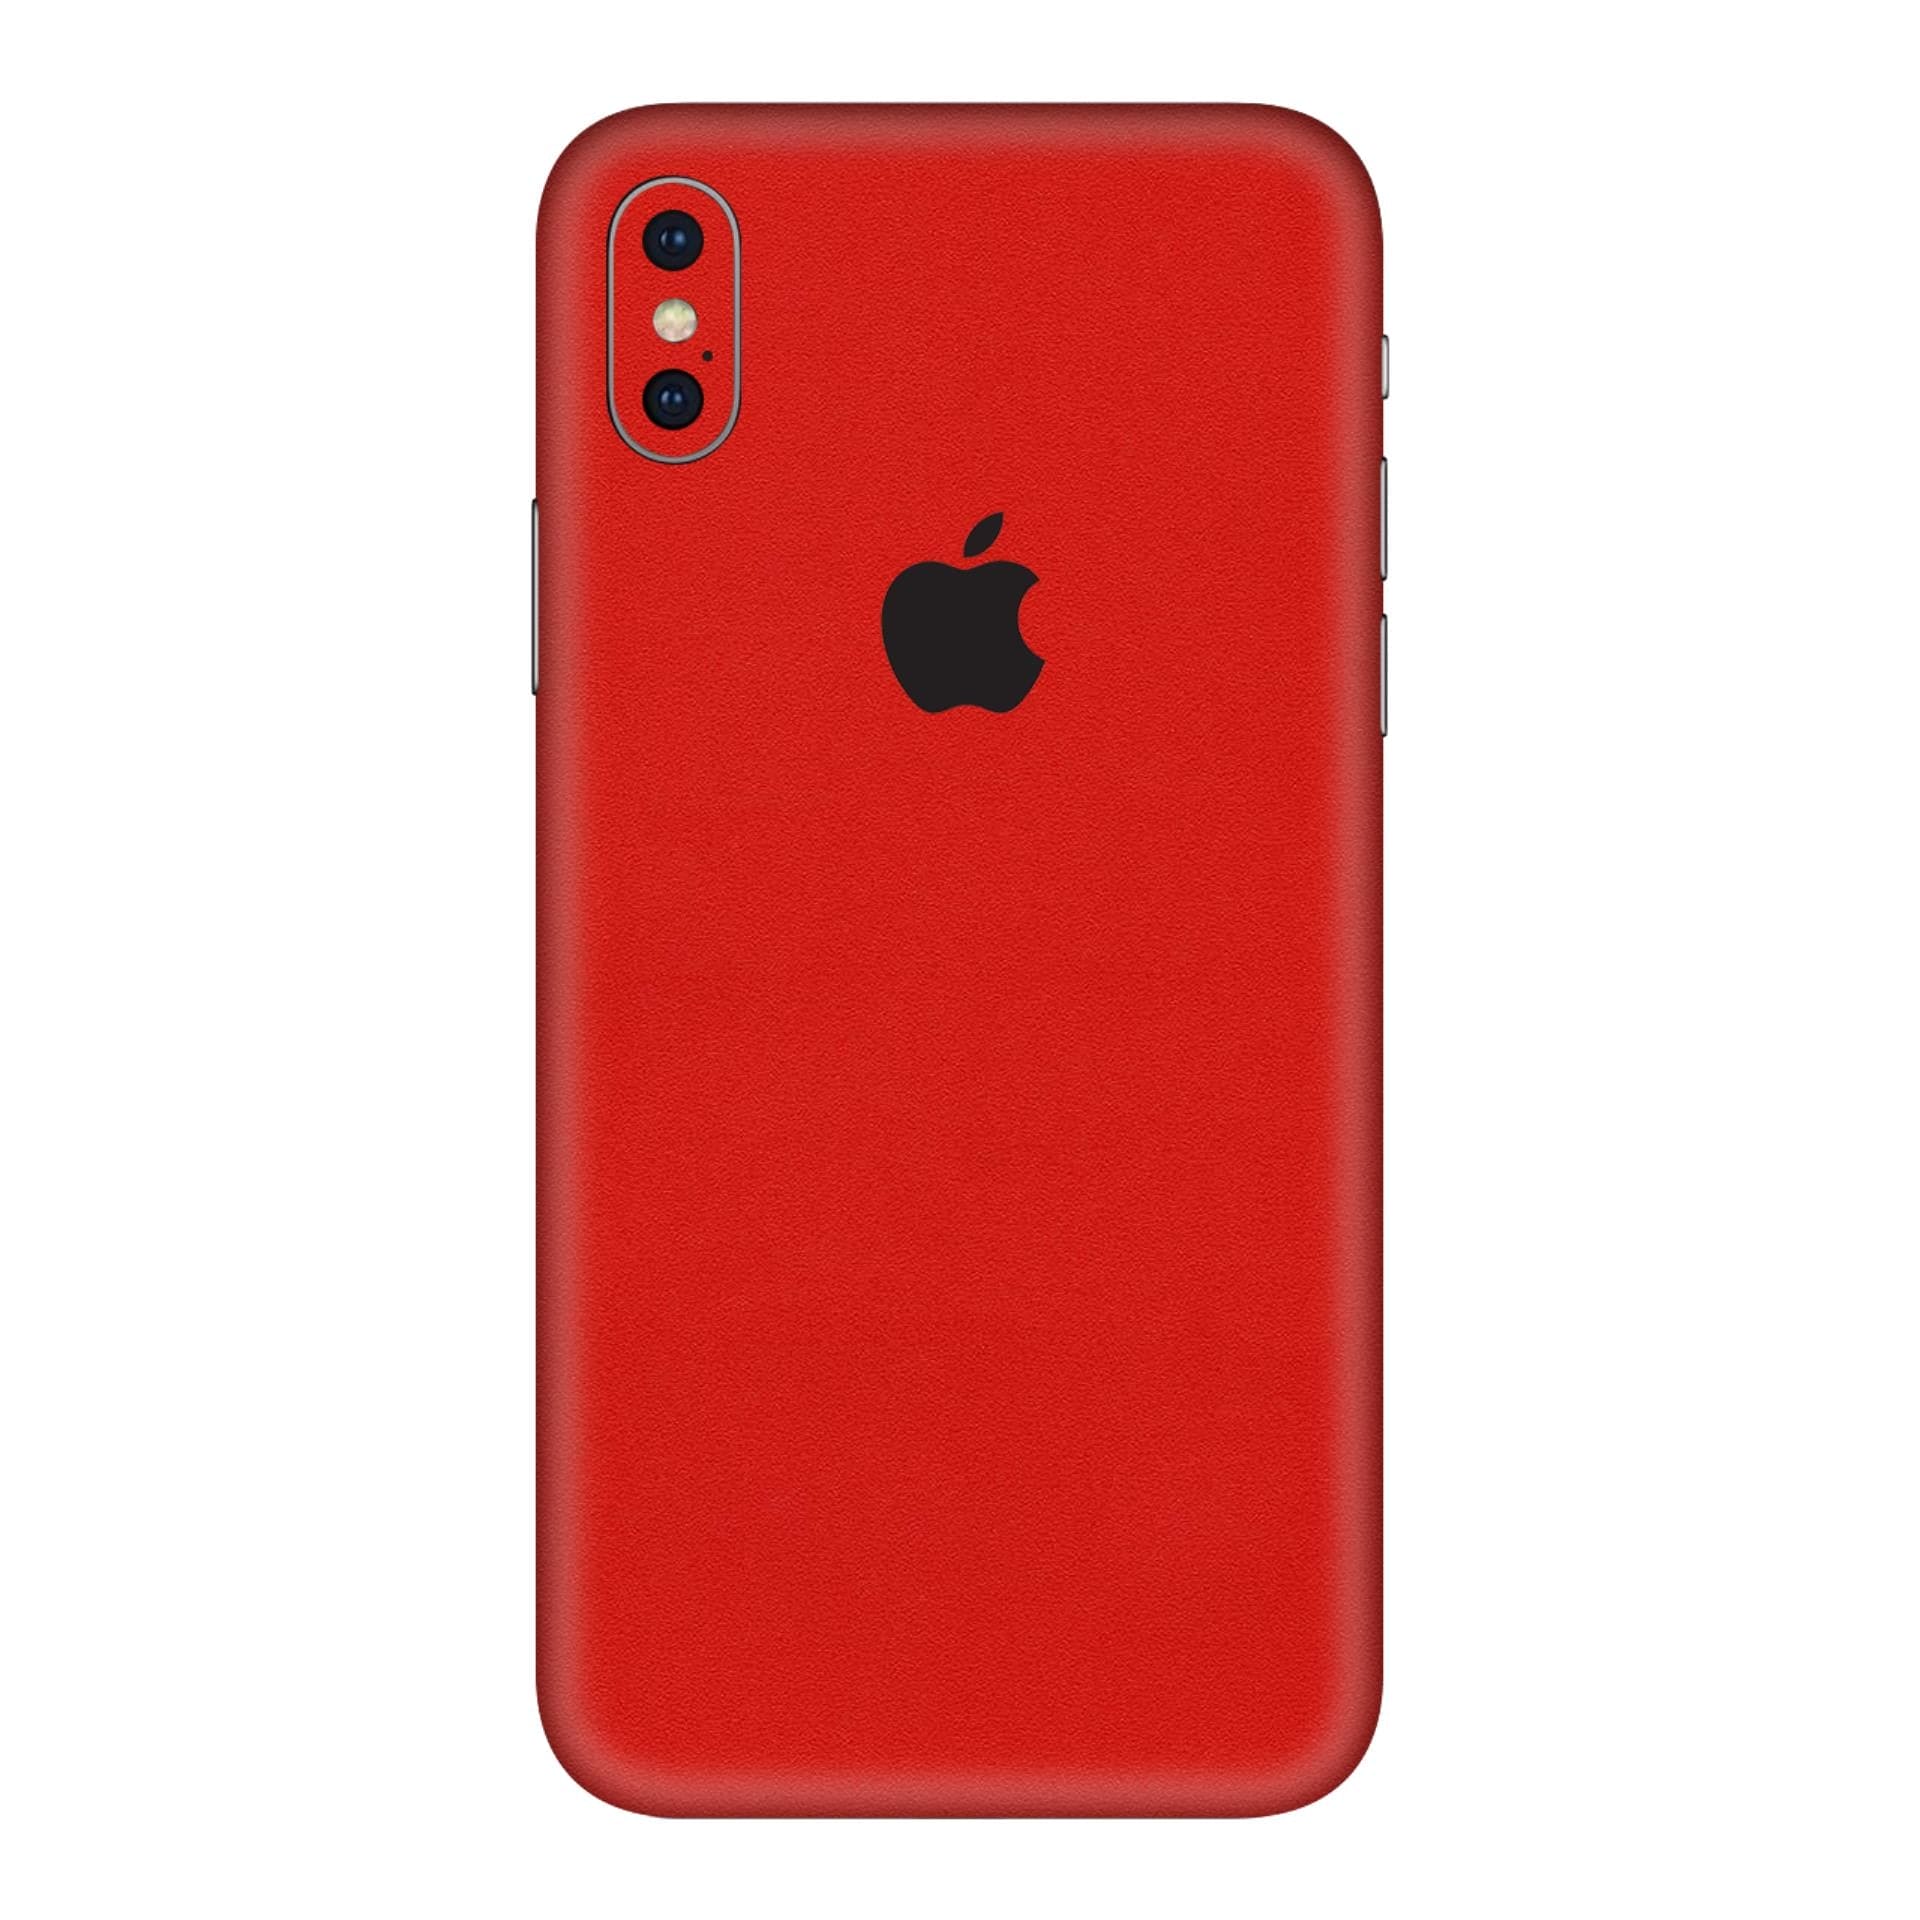 iphone XS Max Matte Red skins